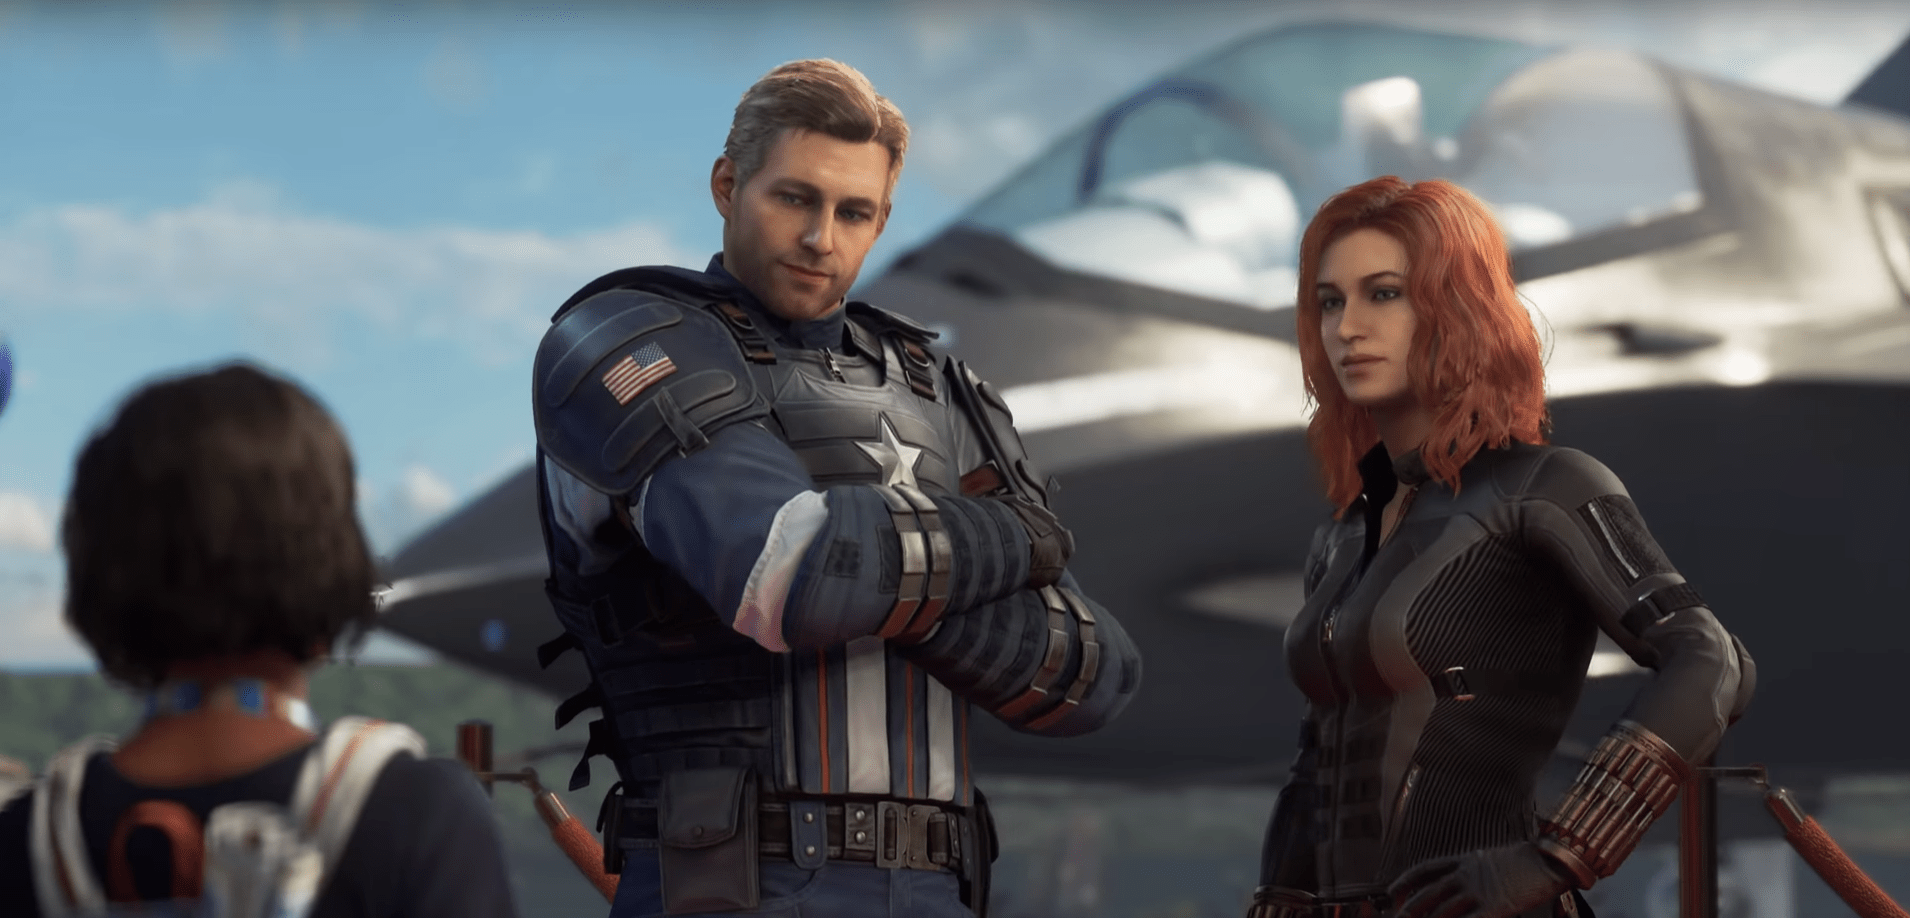 Marvel’s Avengers Isn’t Dead Yet; Crystal Dynamics Is Attempting To Bring More Content